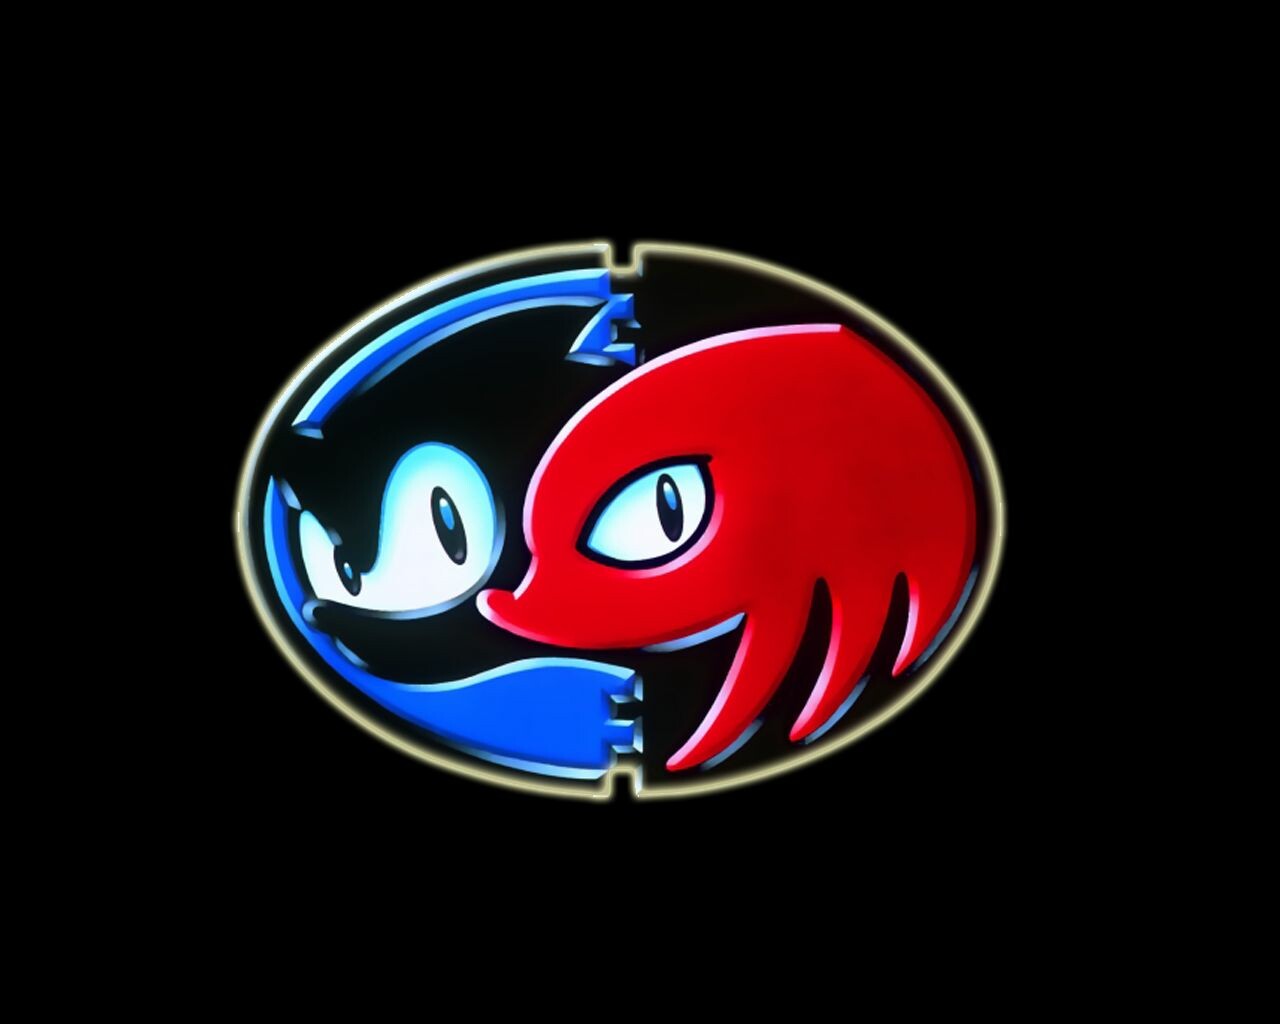 Game Boy Advance - Sonic Battle - Tails  Sonic, Frame by frame animation,  Sonic and shadow